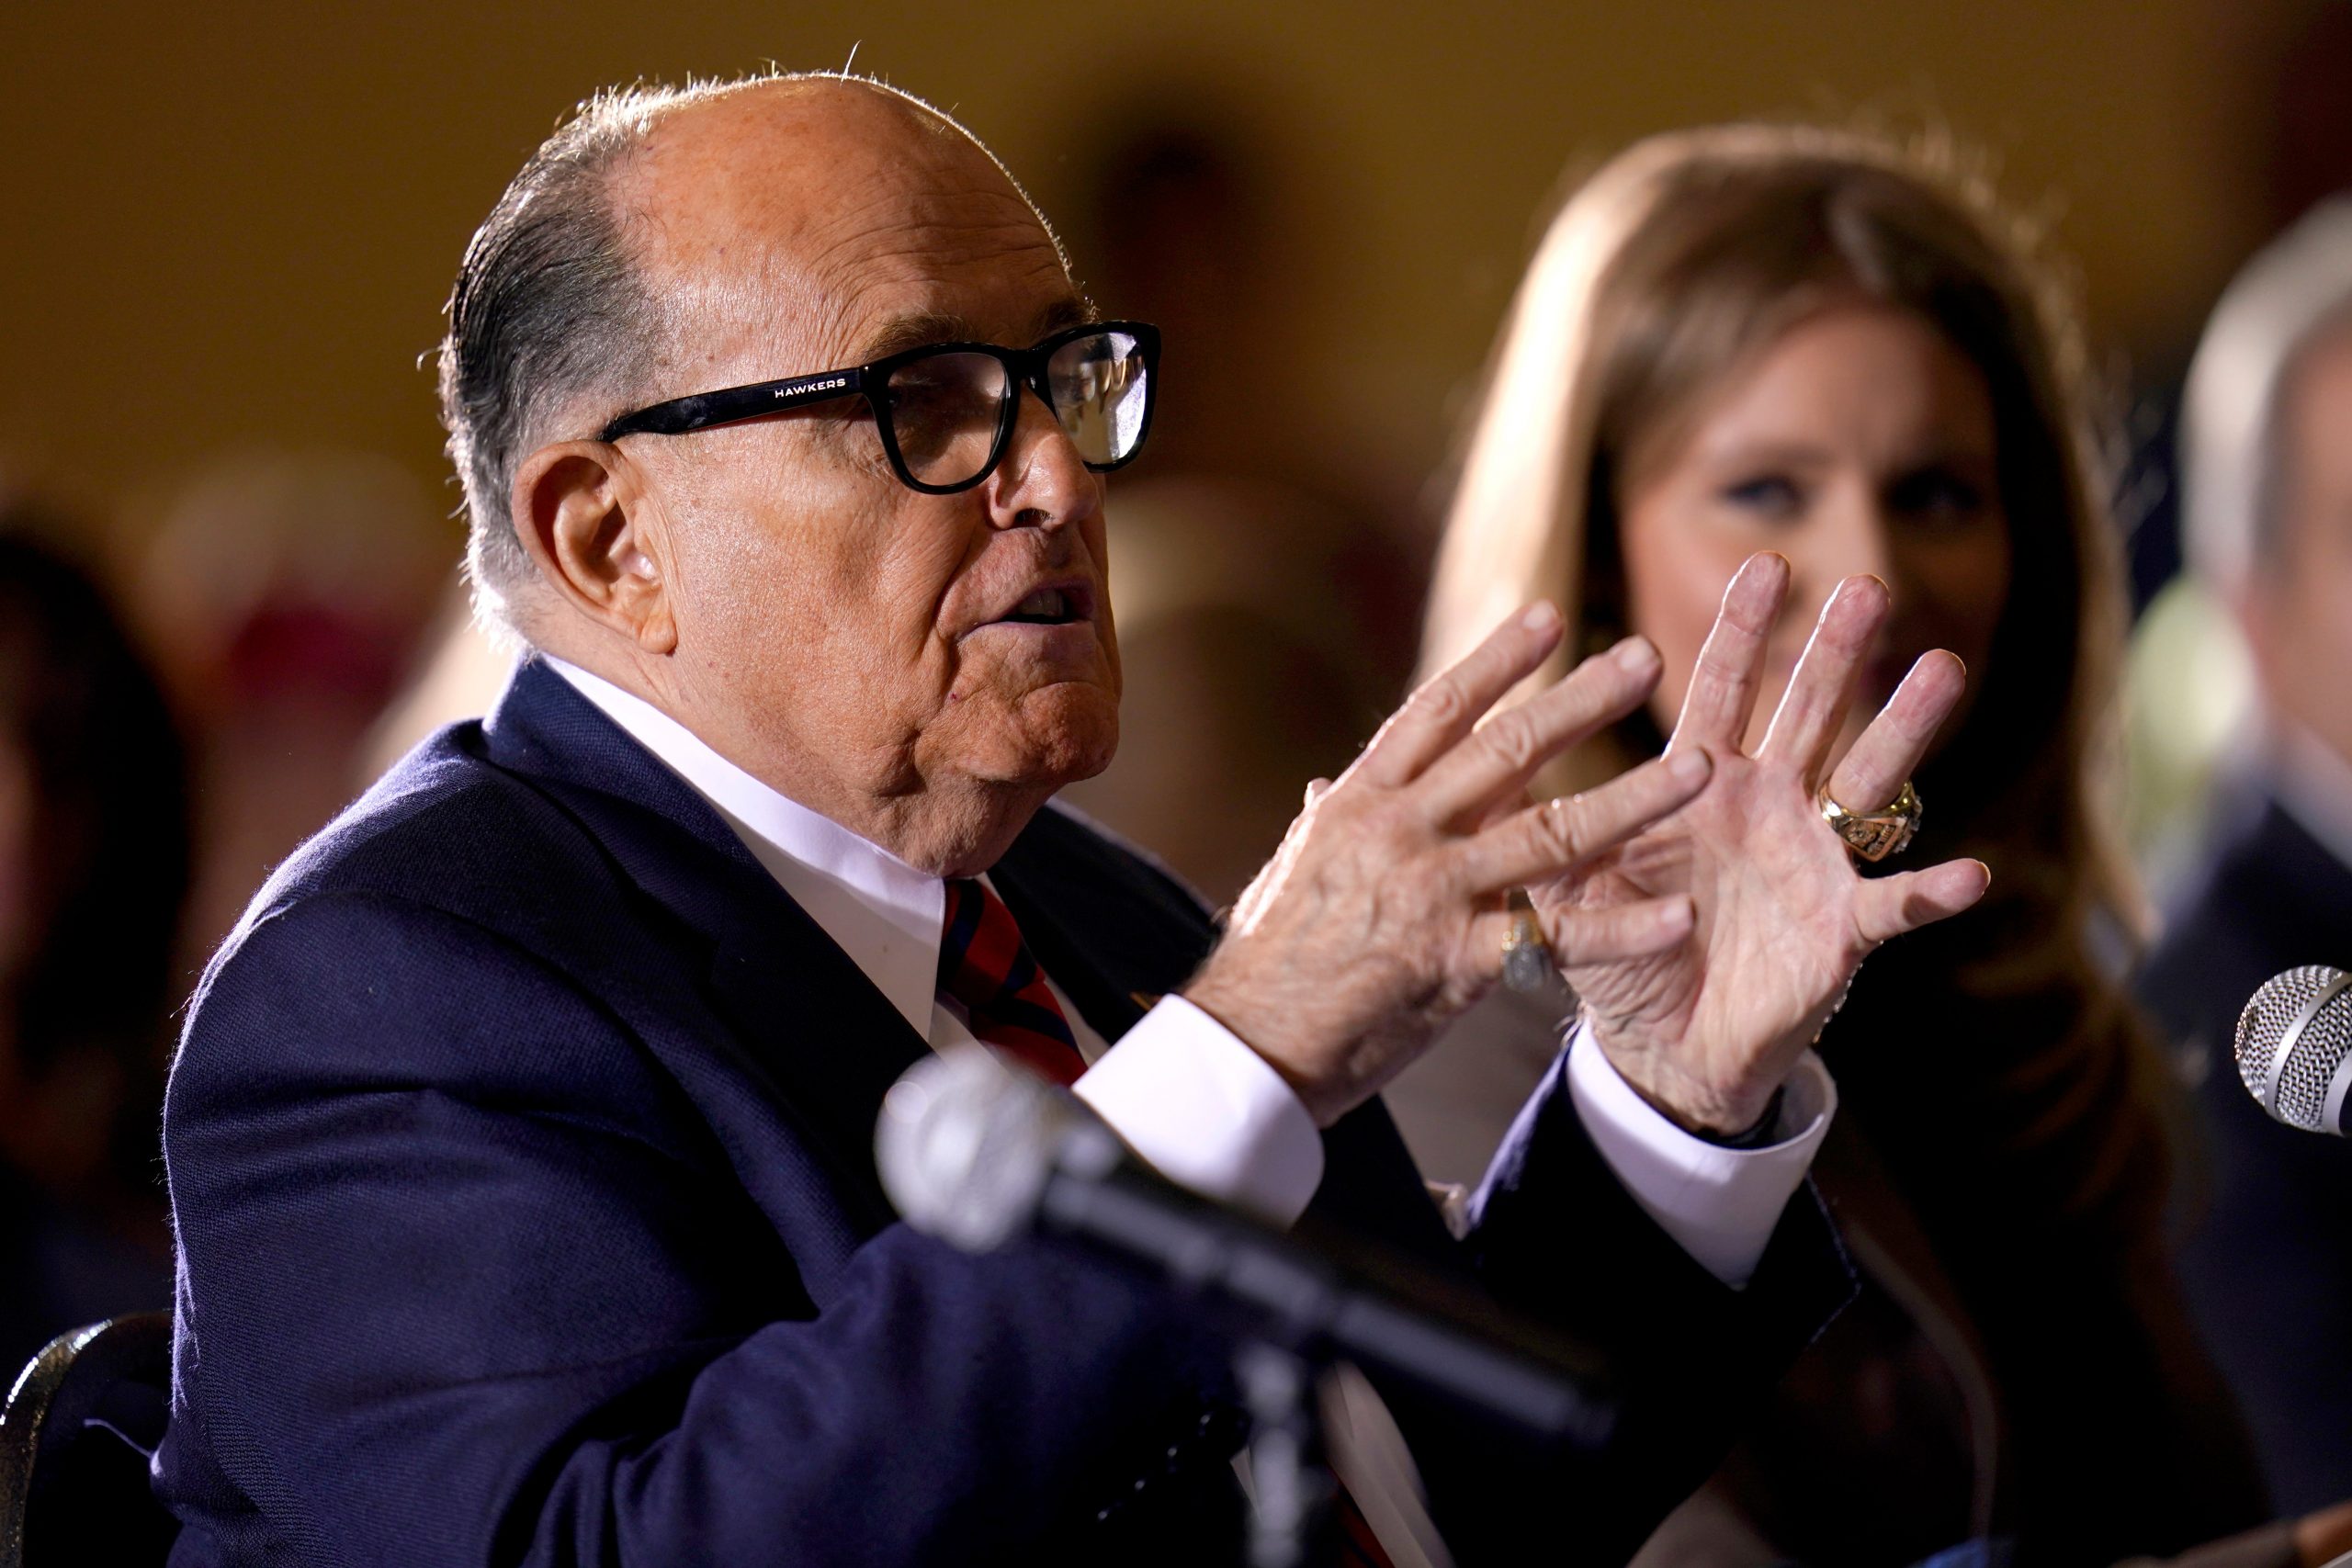 “Your election is fake”: Giuliani tells Pennsylvania “I know scammers very well” as he appears in Gettysburg